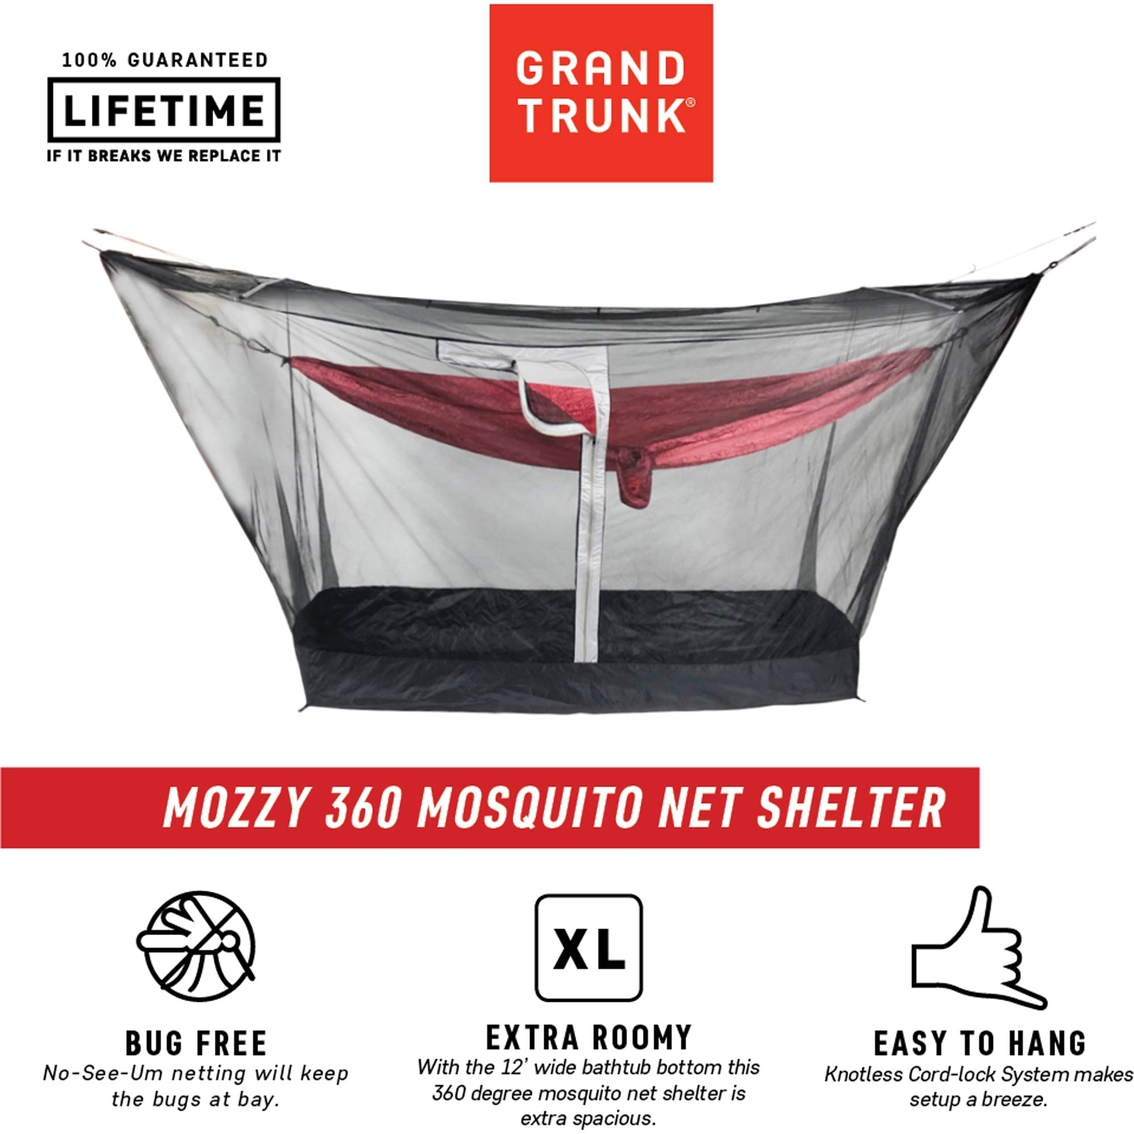 Grand Trunk Mozzy 360 Shelter Deluxe Mosquito Netting - Image 7 of 10